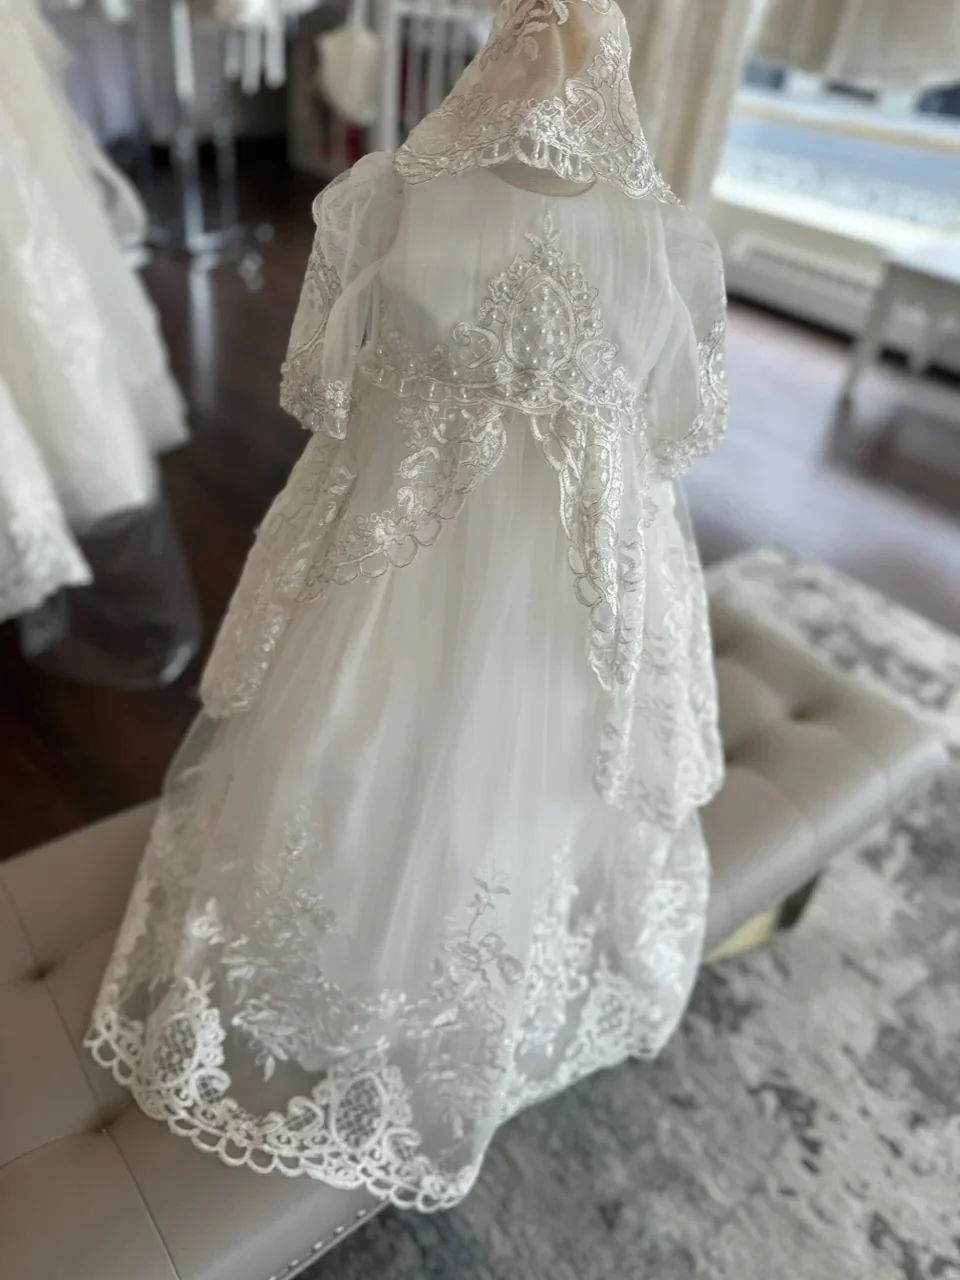 

Graceful Ivory Baby Christening Gowns Lace Toddler Girls Baptism Dresses Glitter Beads Newborn Infant First Communion Dresses